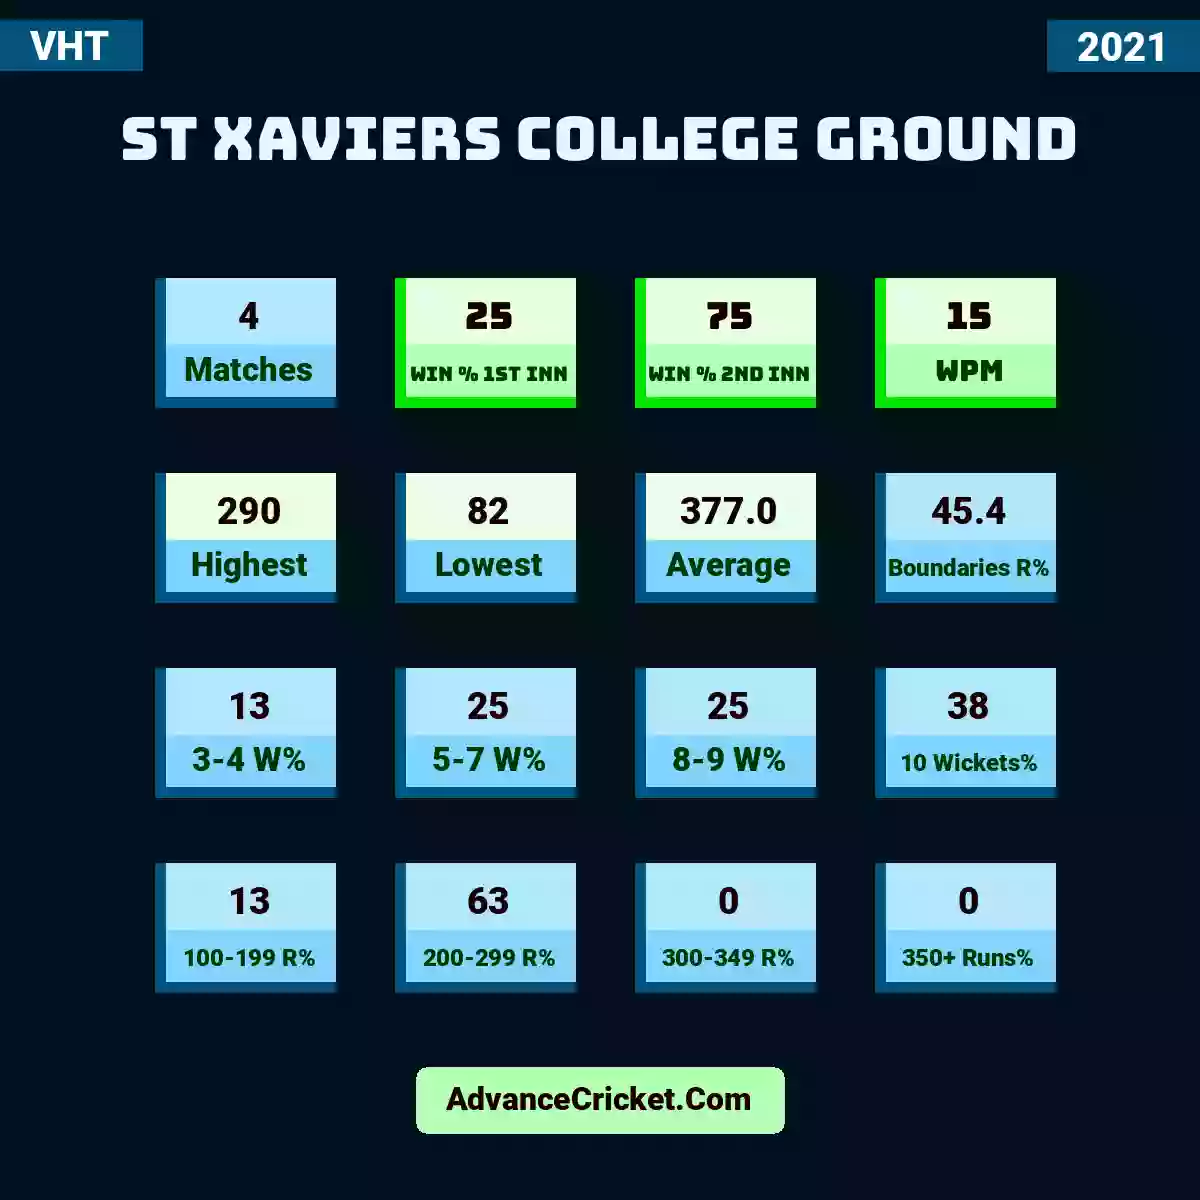 Image showing St Xaviers College Ground with Matches: 4, Win % 1st Inn: 25, Win % 2nd Inn: 75, WPM: 15, Highest: 290, Lowest: 82, Average: 377.0, Boundaries R%: 45.4, 3-4 W%: 13, 5-7 W%: 25, 8-9 W%: 25, 10 Wickets%: 38, 100-199 R%: 13, 200-299 R%: 63, 300-349 R%: 0, 350+ Runs%: 0.